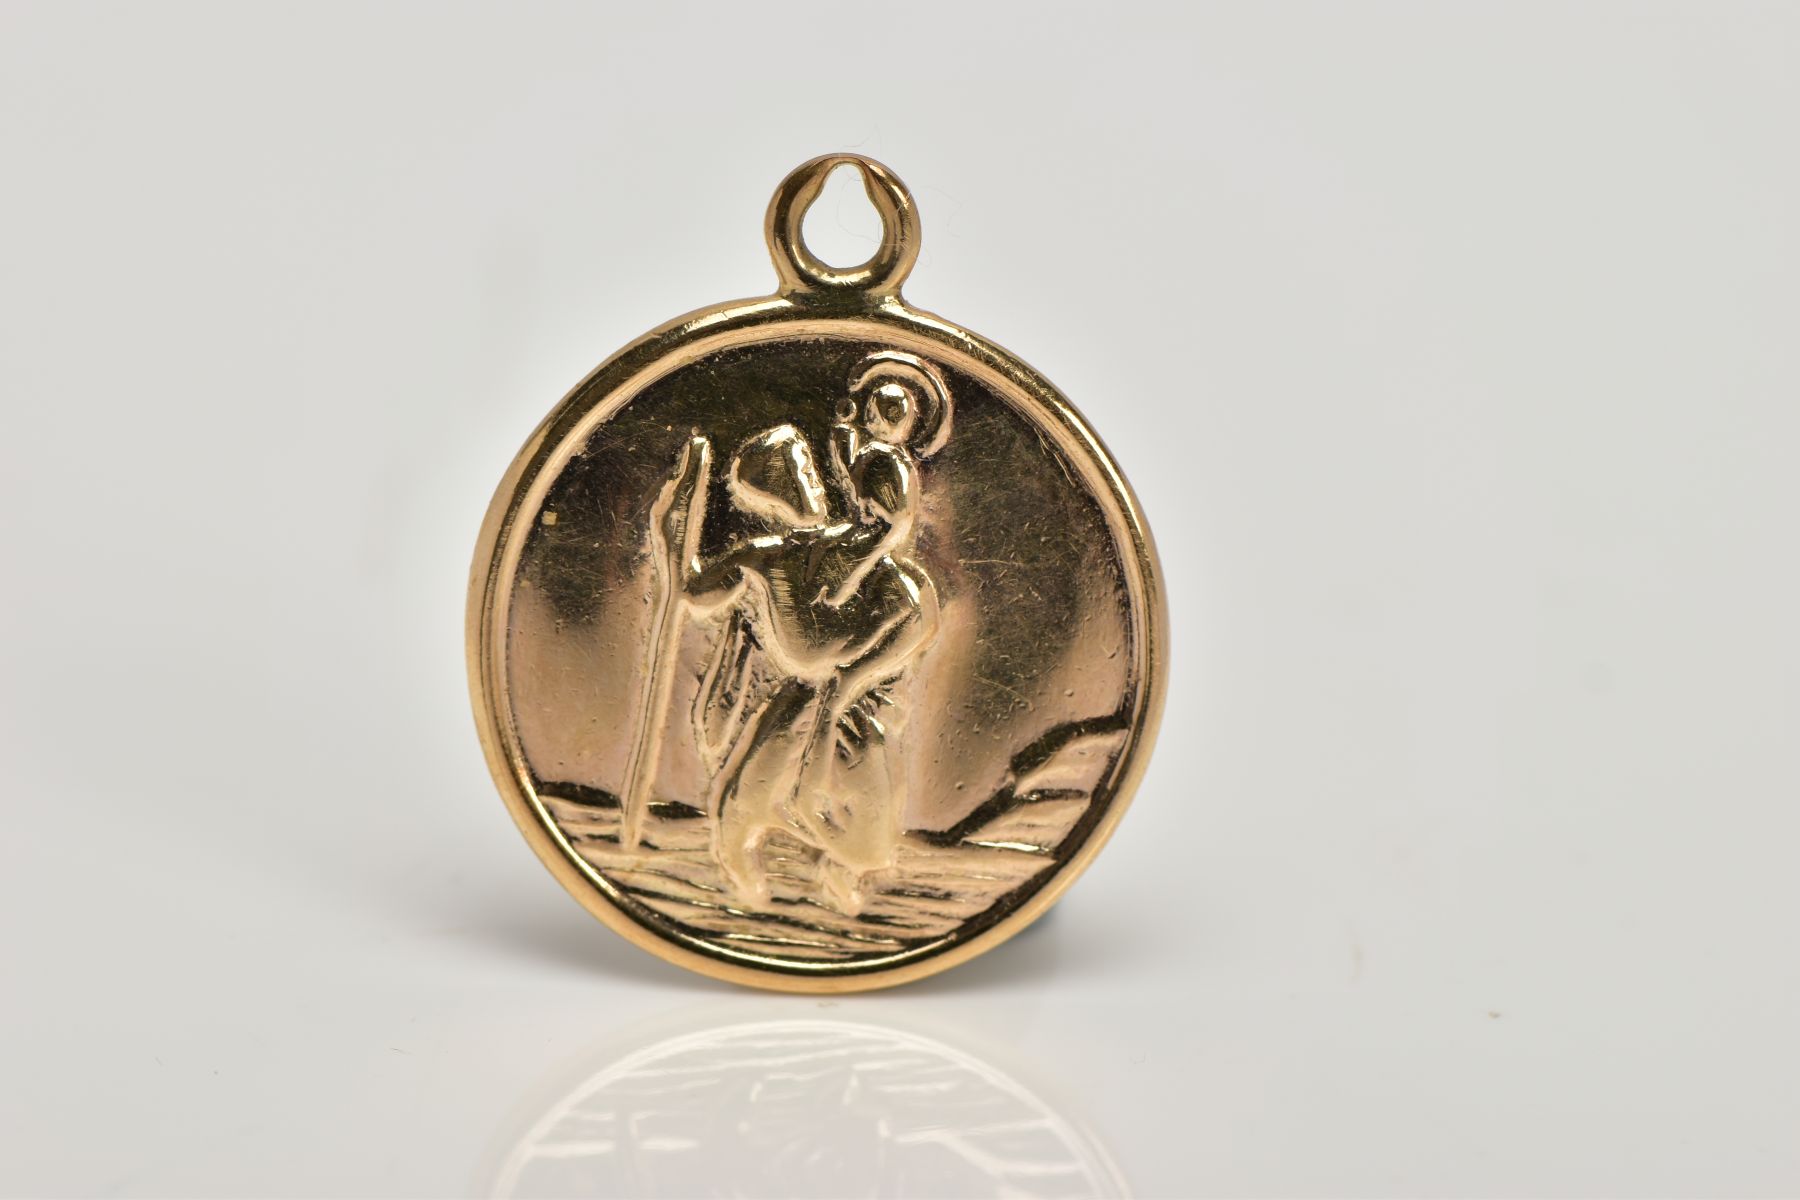 A 9CT GOLD ST. CHRISTOPHER PENDANT, of a circular form, approximate diameter 17.4mm, engraved